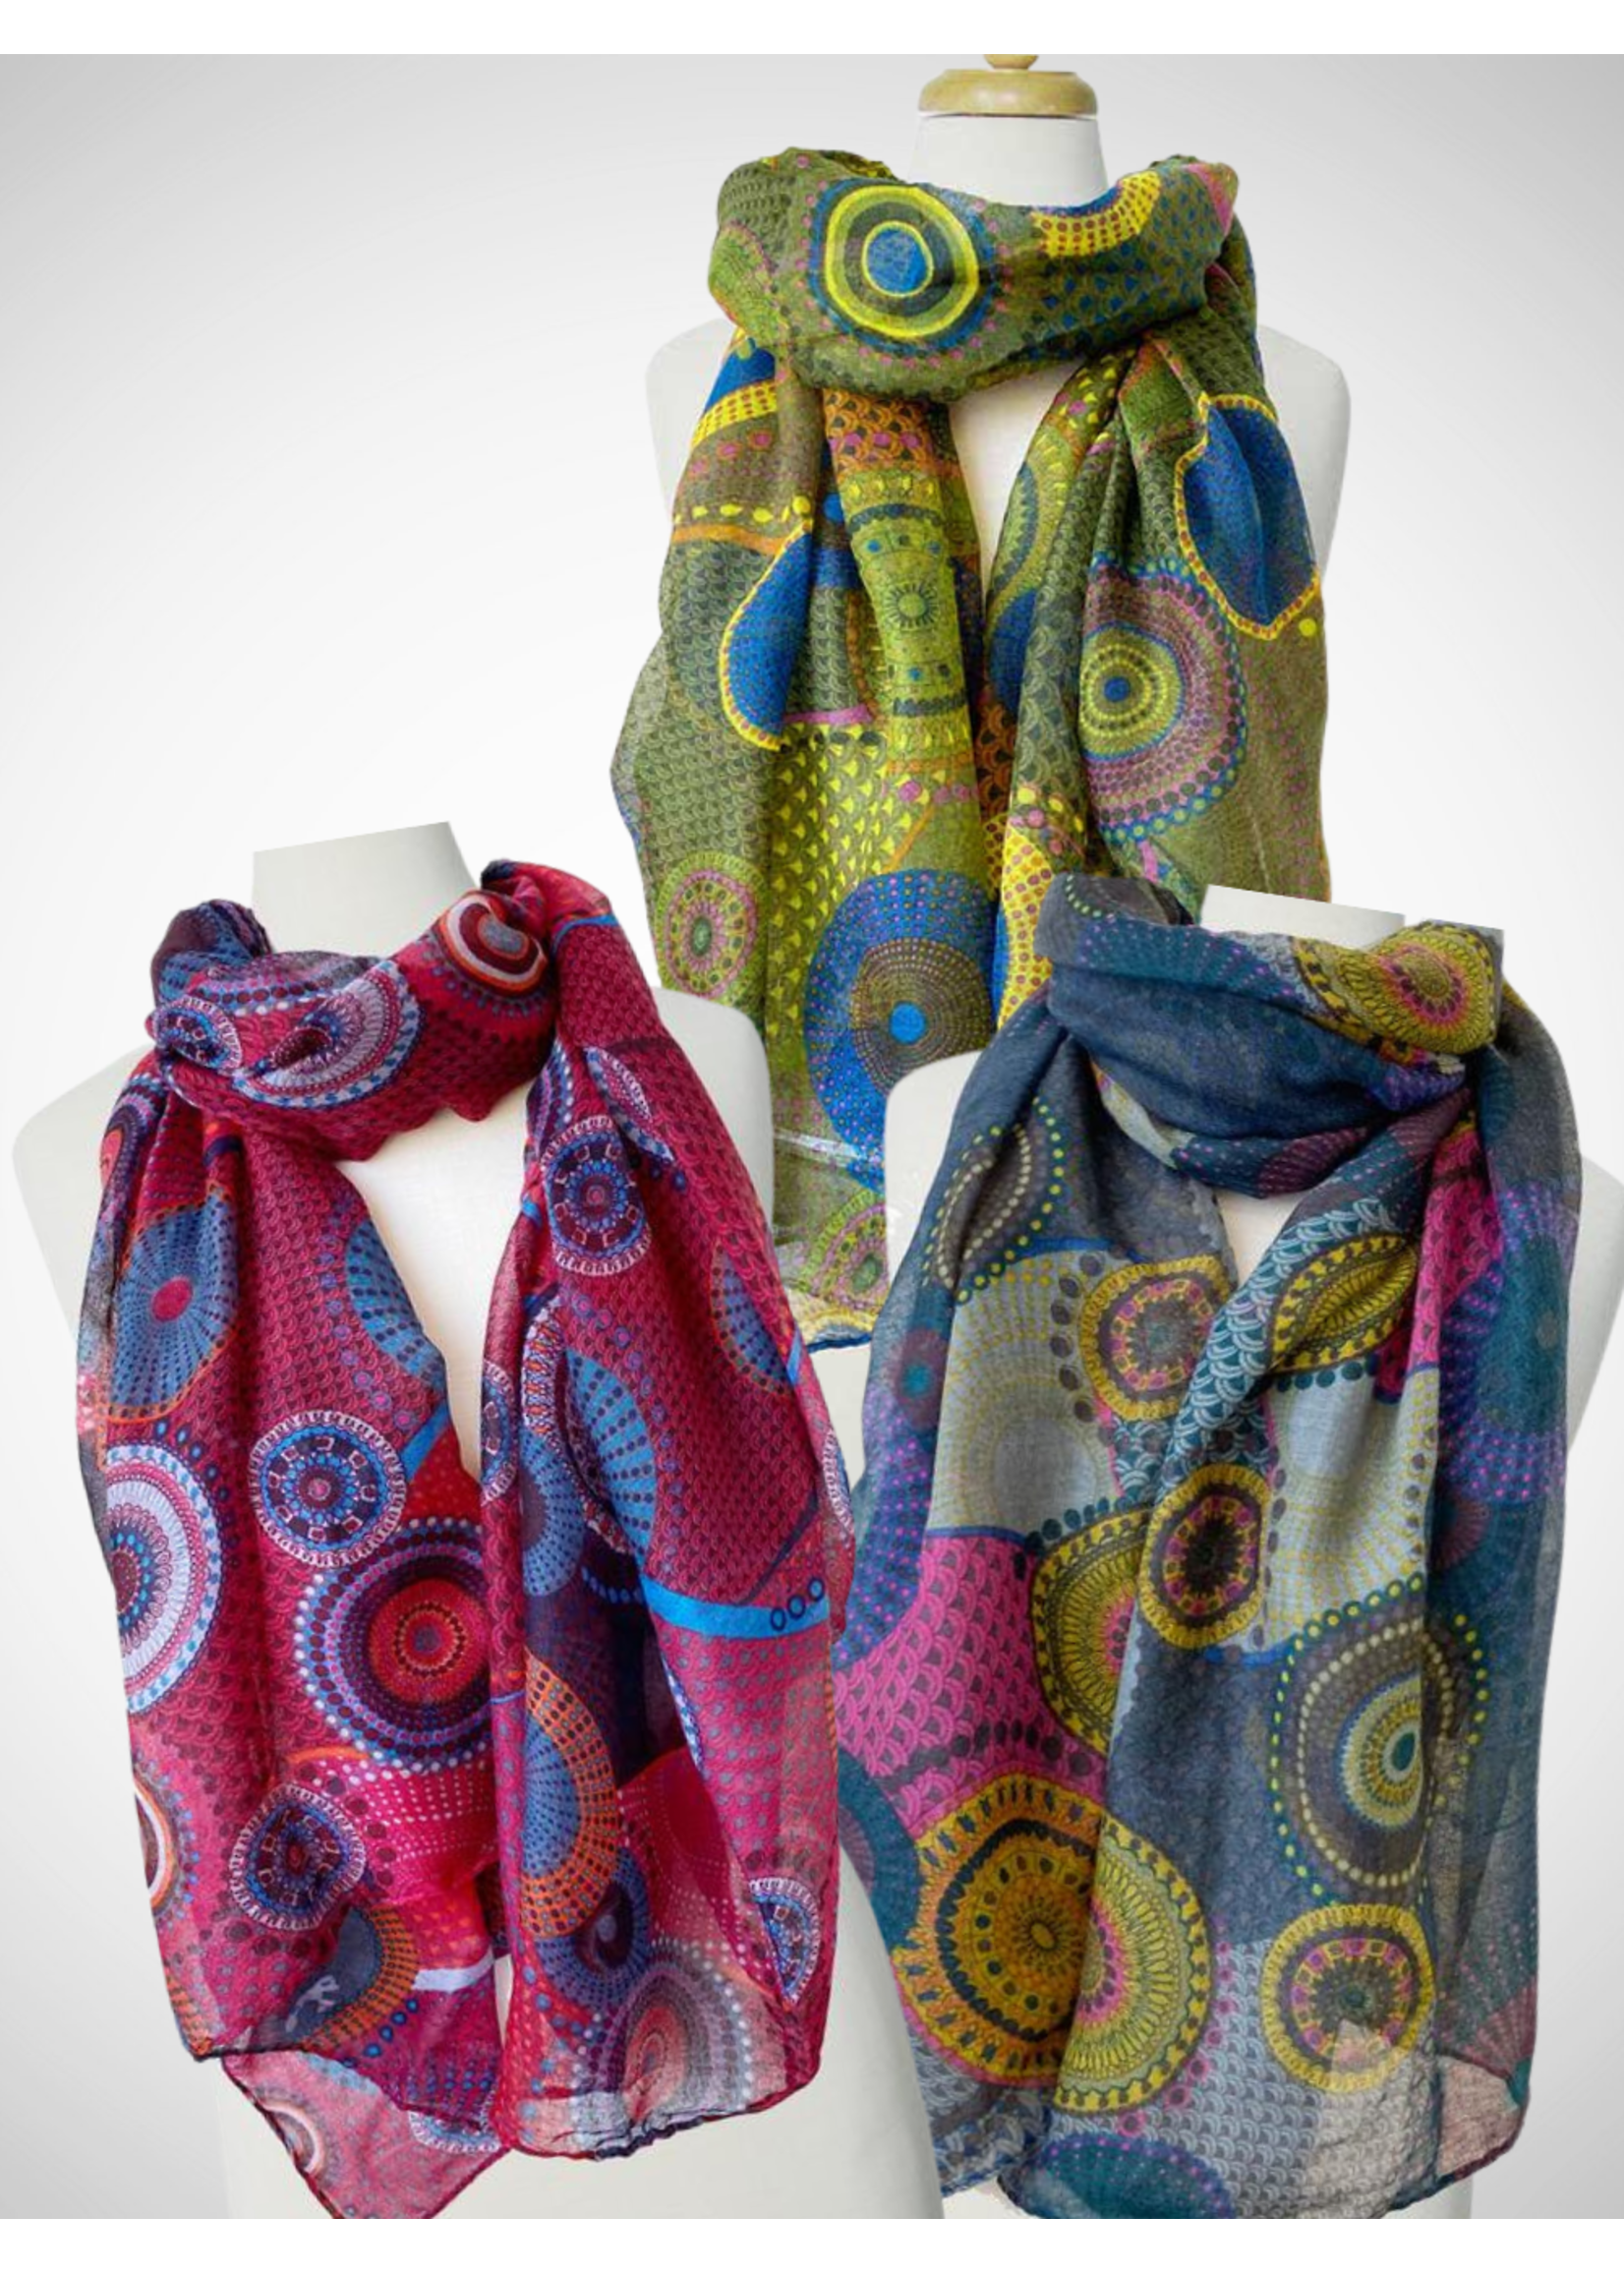 Caracol Round Print Scarf